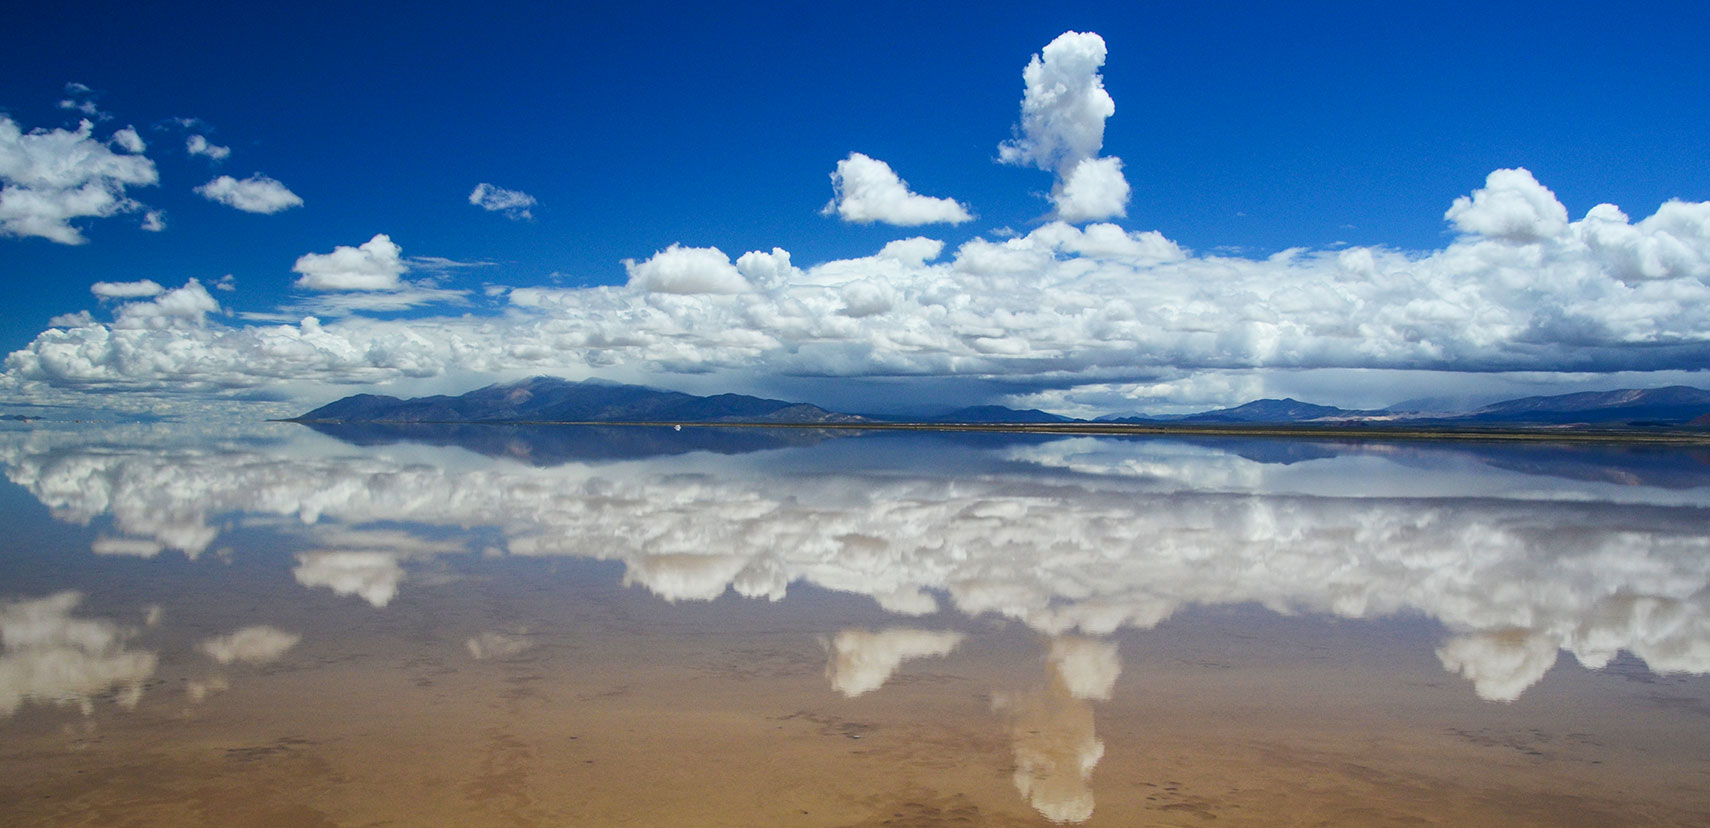 Salinas Grandes salt flat in the Argentinean province of Jujuy.